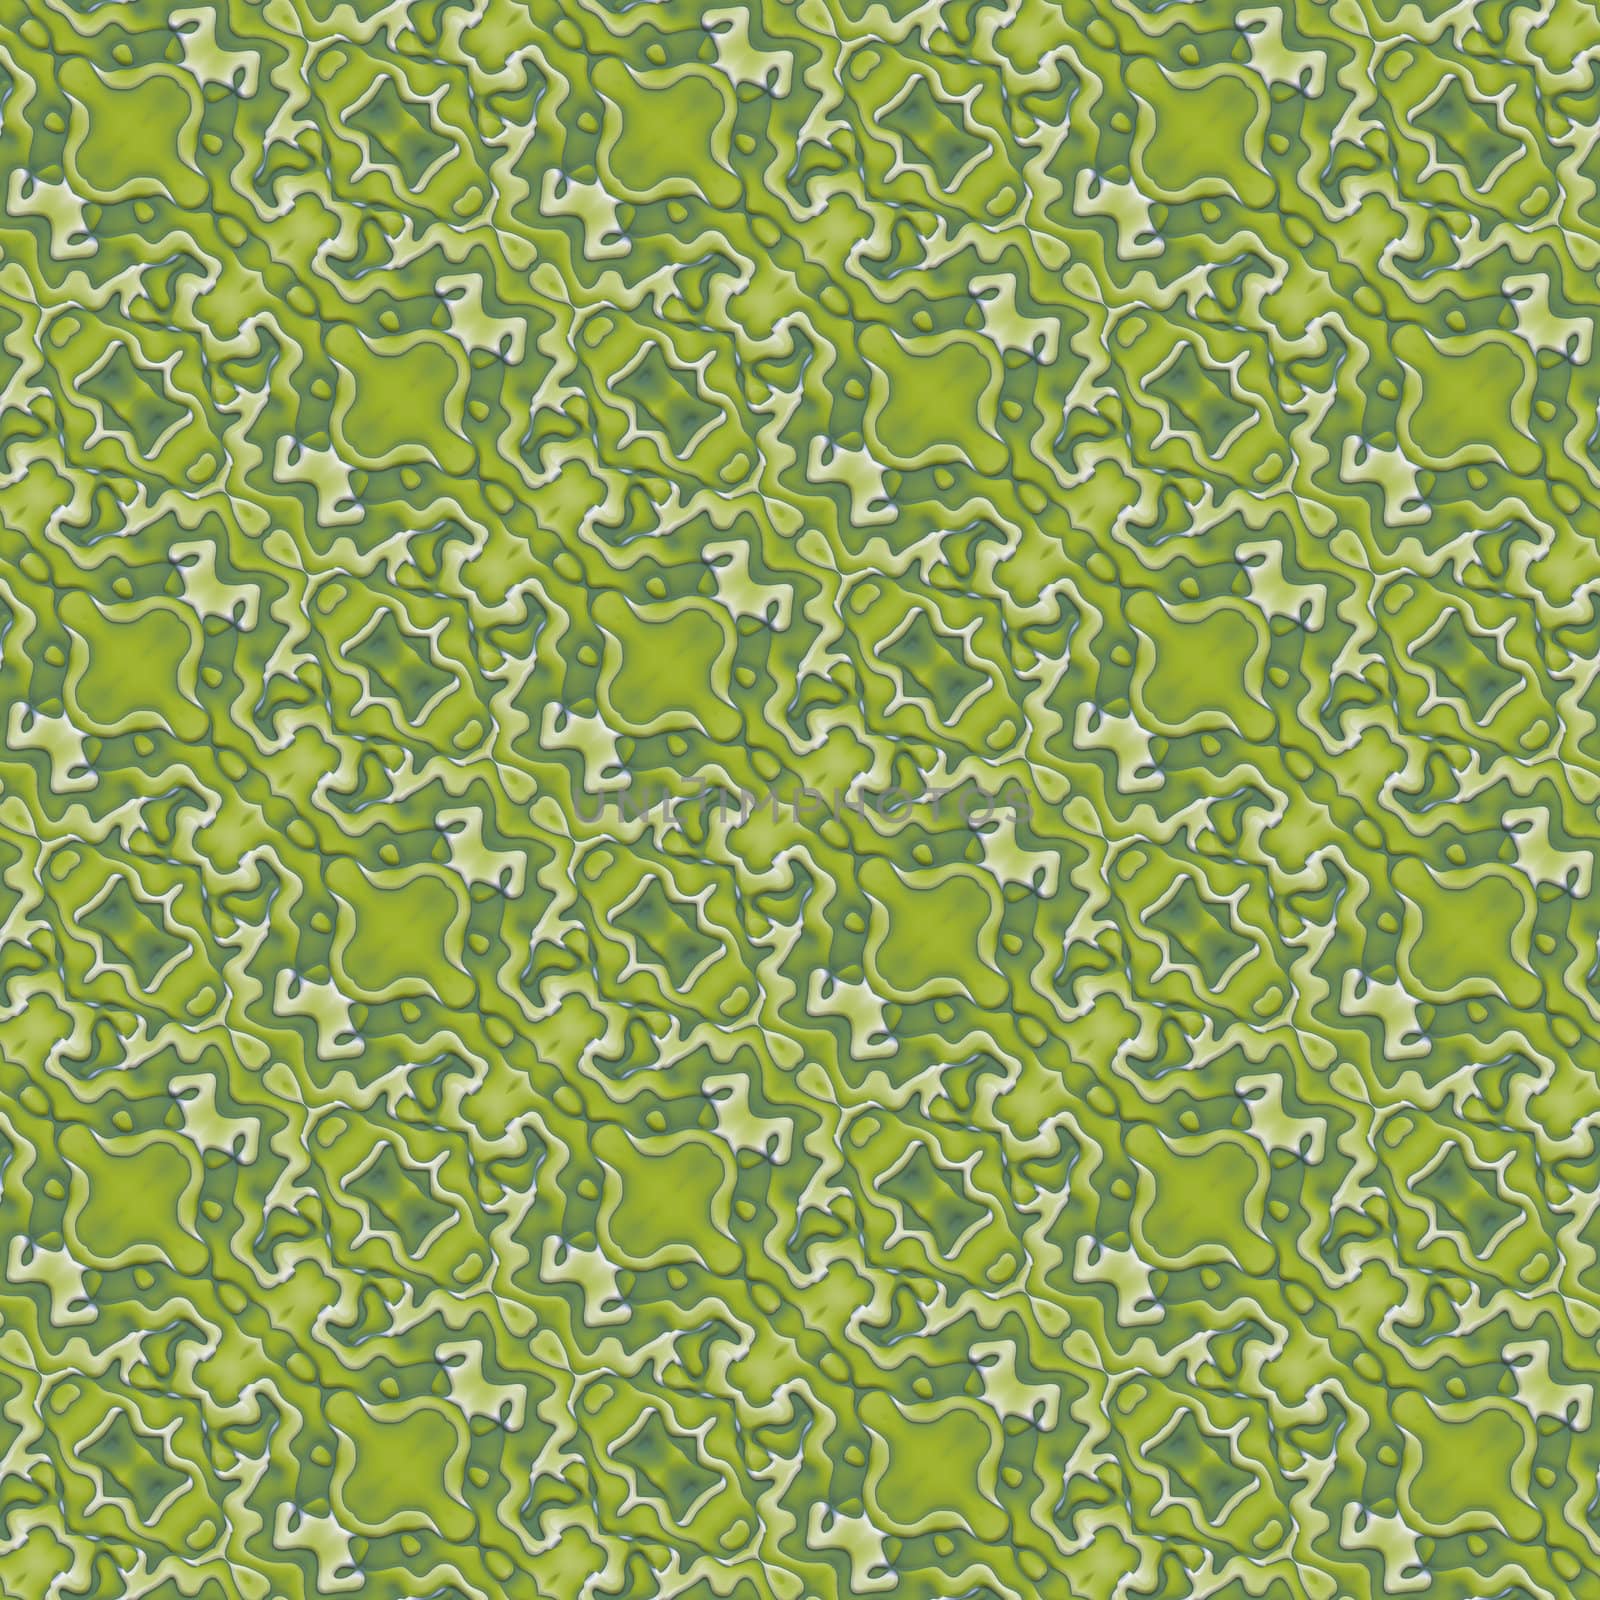 An image of a nice abstract green background